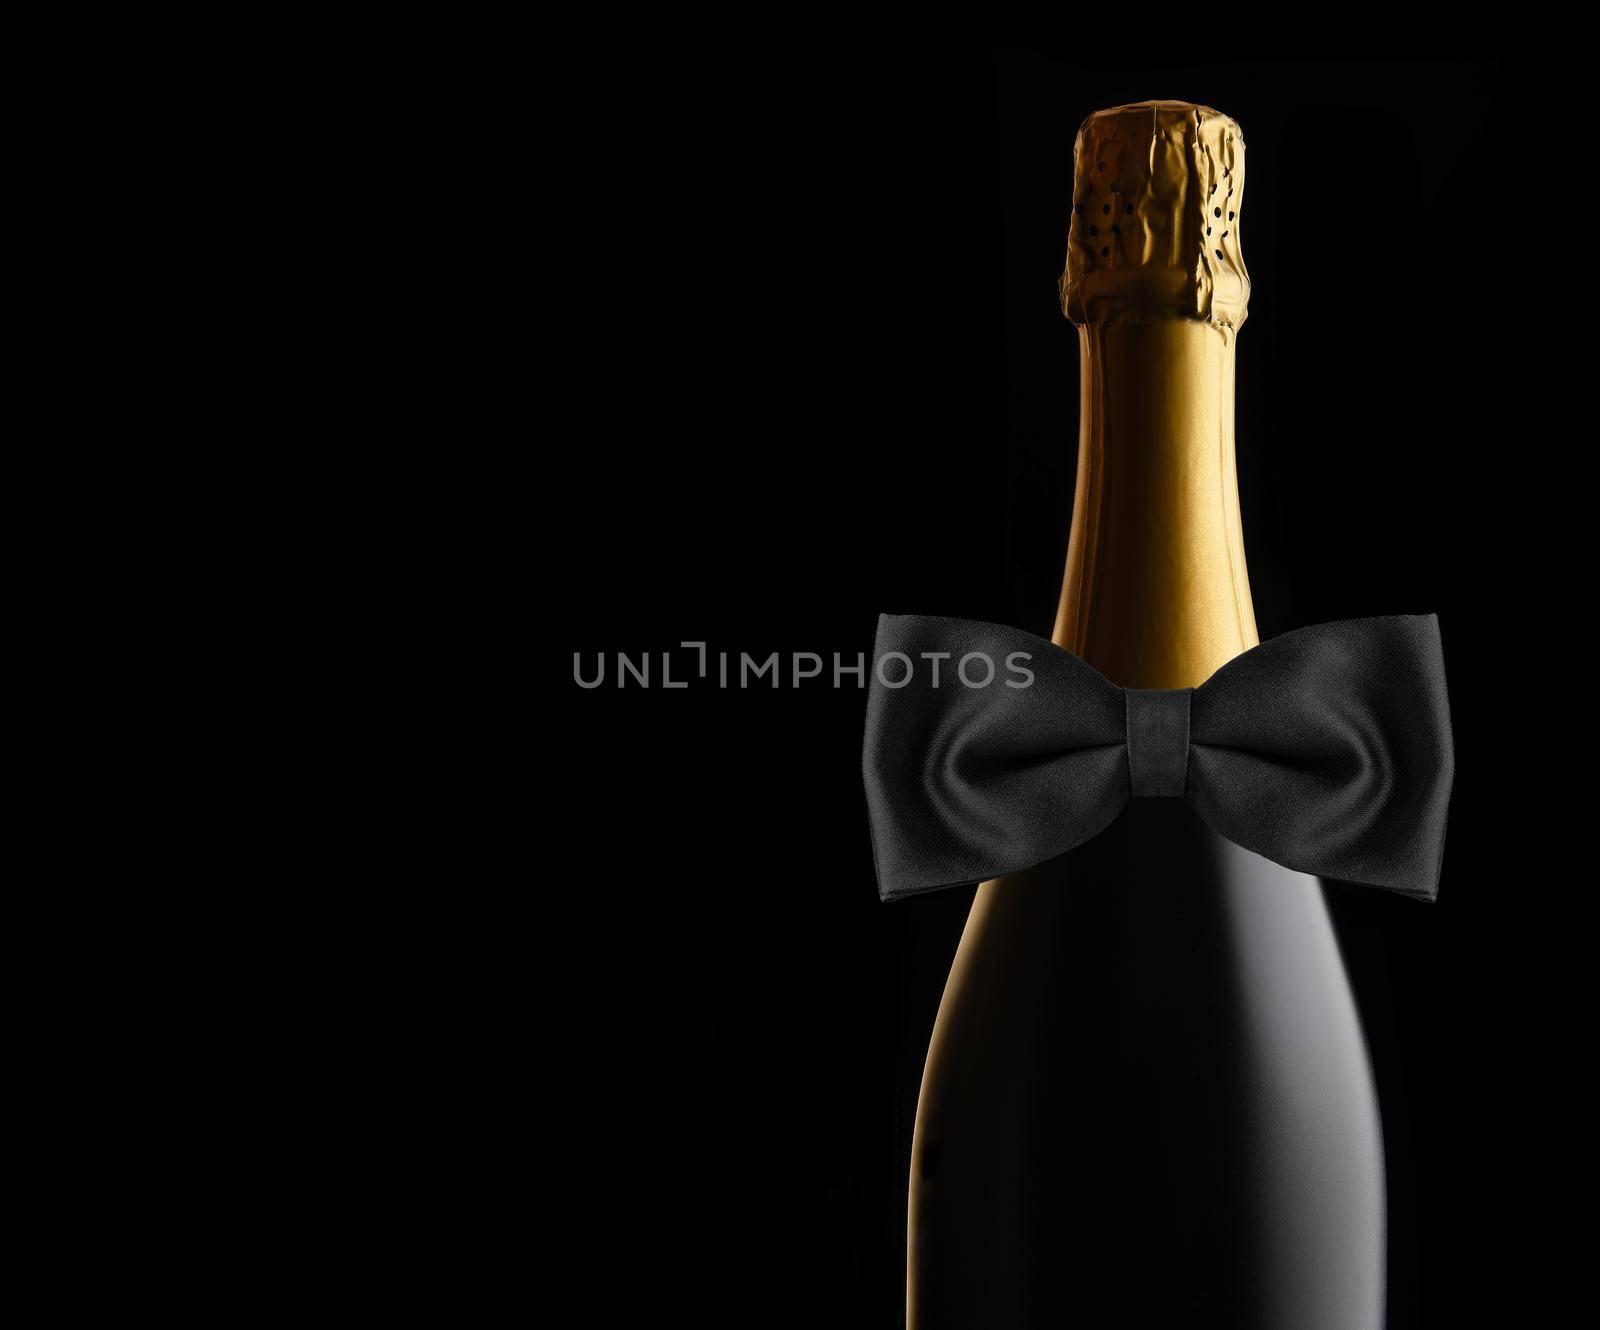 Unopened bottle of Champagne against a black backgroundWith Black Bow Tie. Ideal for Wedding, Anniversary or New Years Projects.  by sCukrov